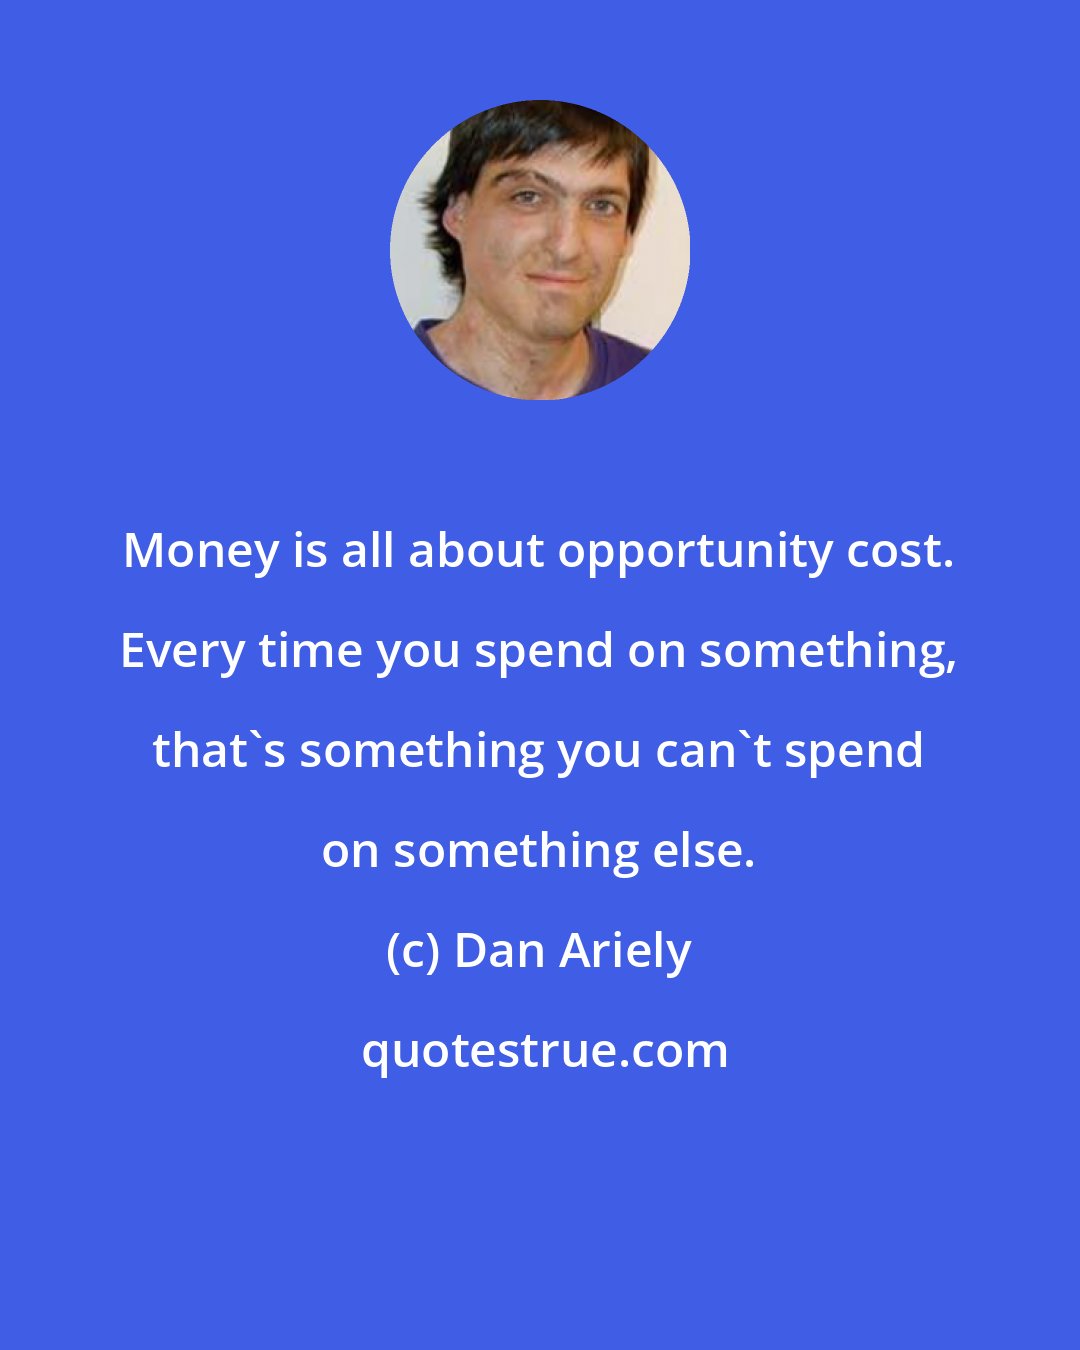 Dan Ariely: Money is all about opportunity cost. Every time you spend on something, that's something you can't spend on something else.